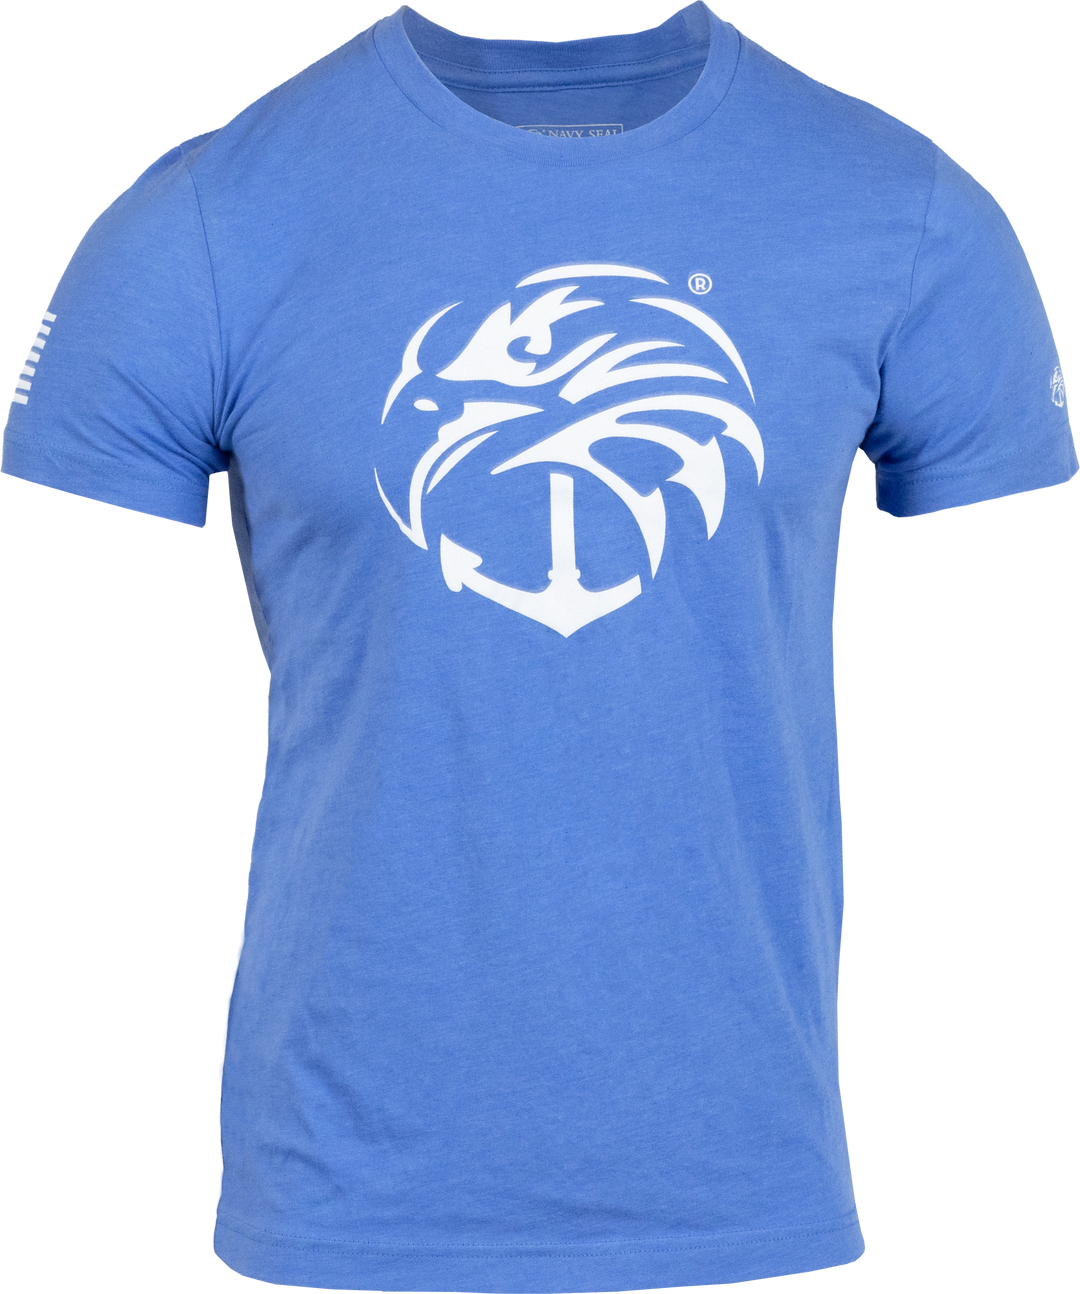 Columbia Blue Tee with white Navy SEAL Foundation logo on front